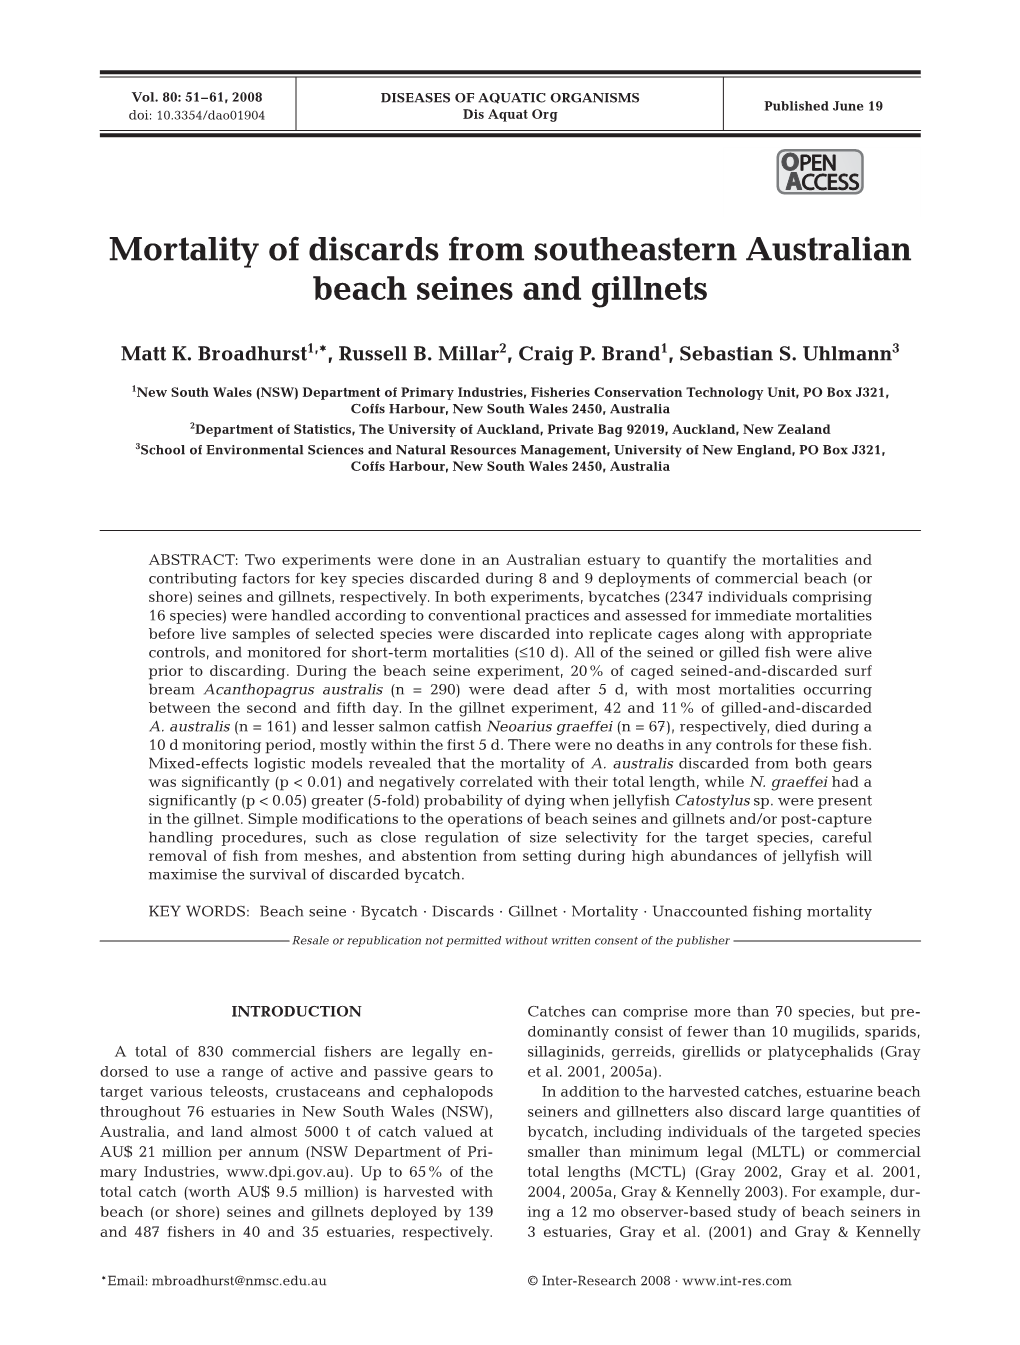 Mortality of Discards from Southeastern Australian Beach Seines and Gillnets